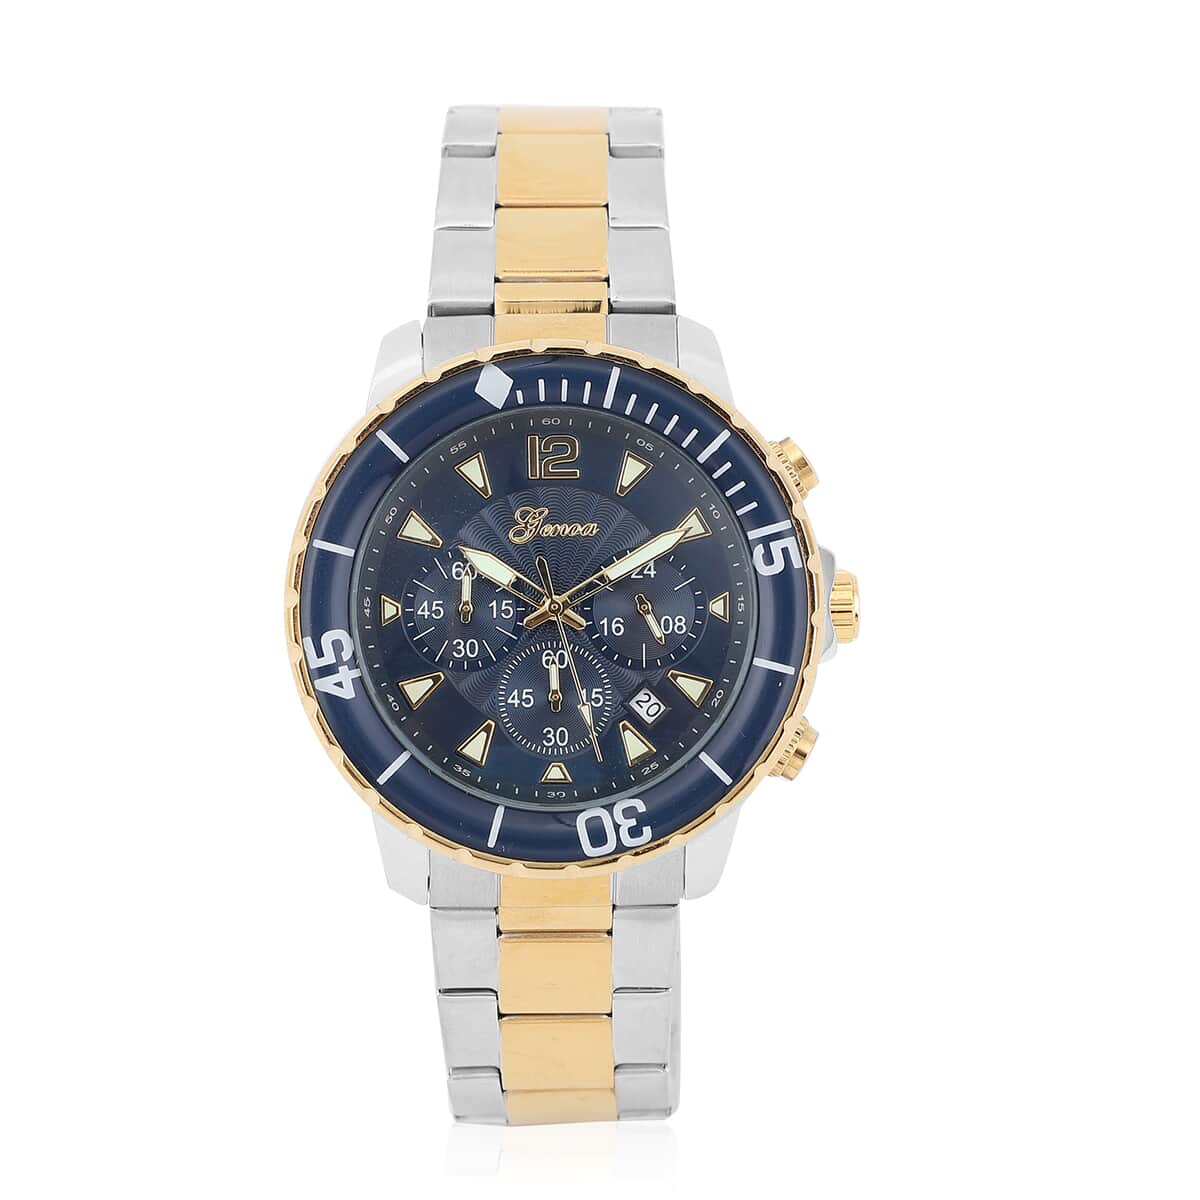 Genoa Multi-Functional Quartz Movement Watch with Blue Dial & Stainless Steel Strap (46 mm) image number 0